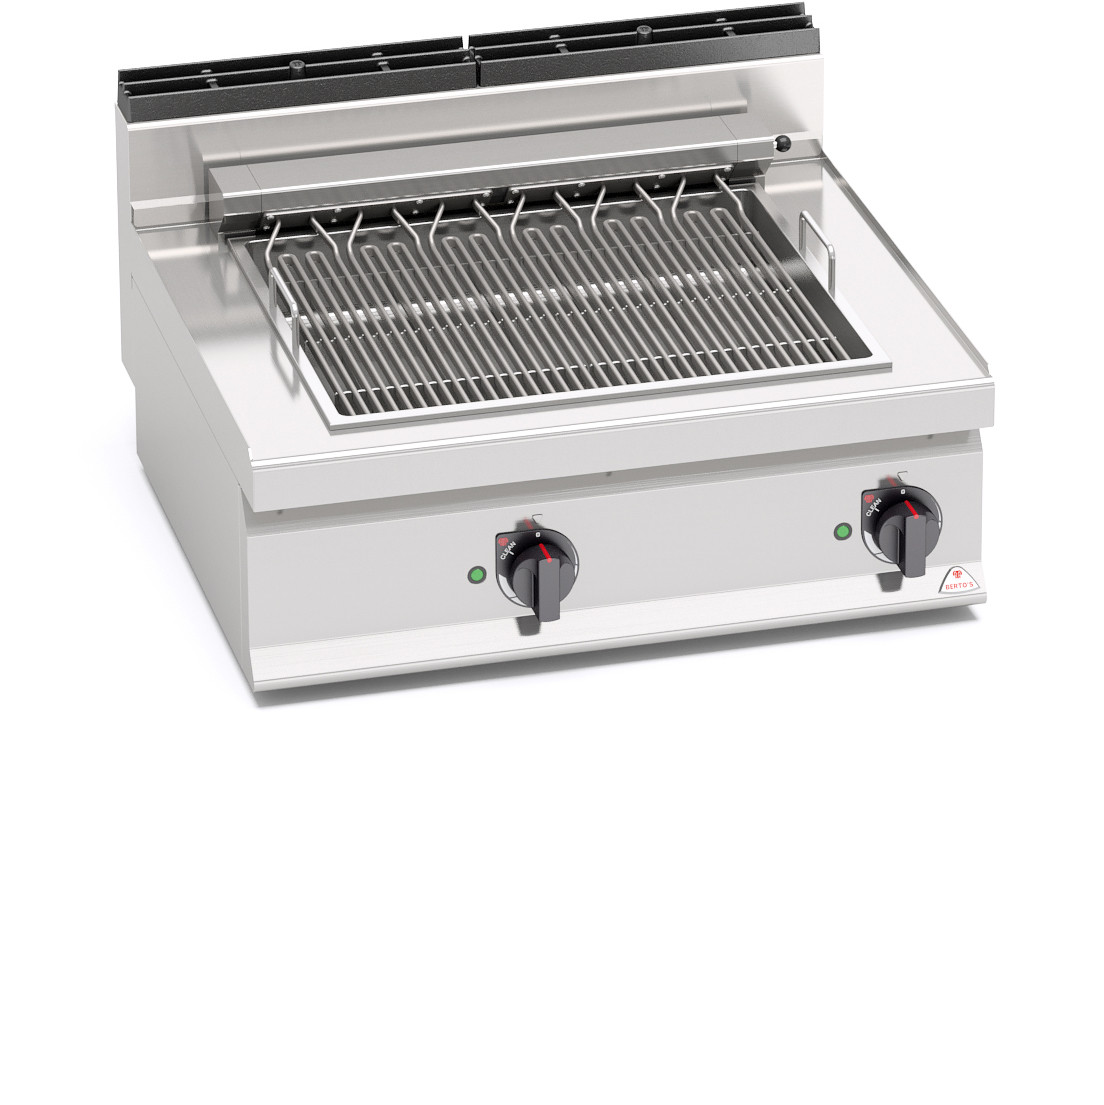 COUNTER TOP ELECTRIC GRILL - 18155500 - Commercial kitchens